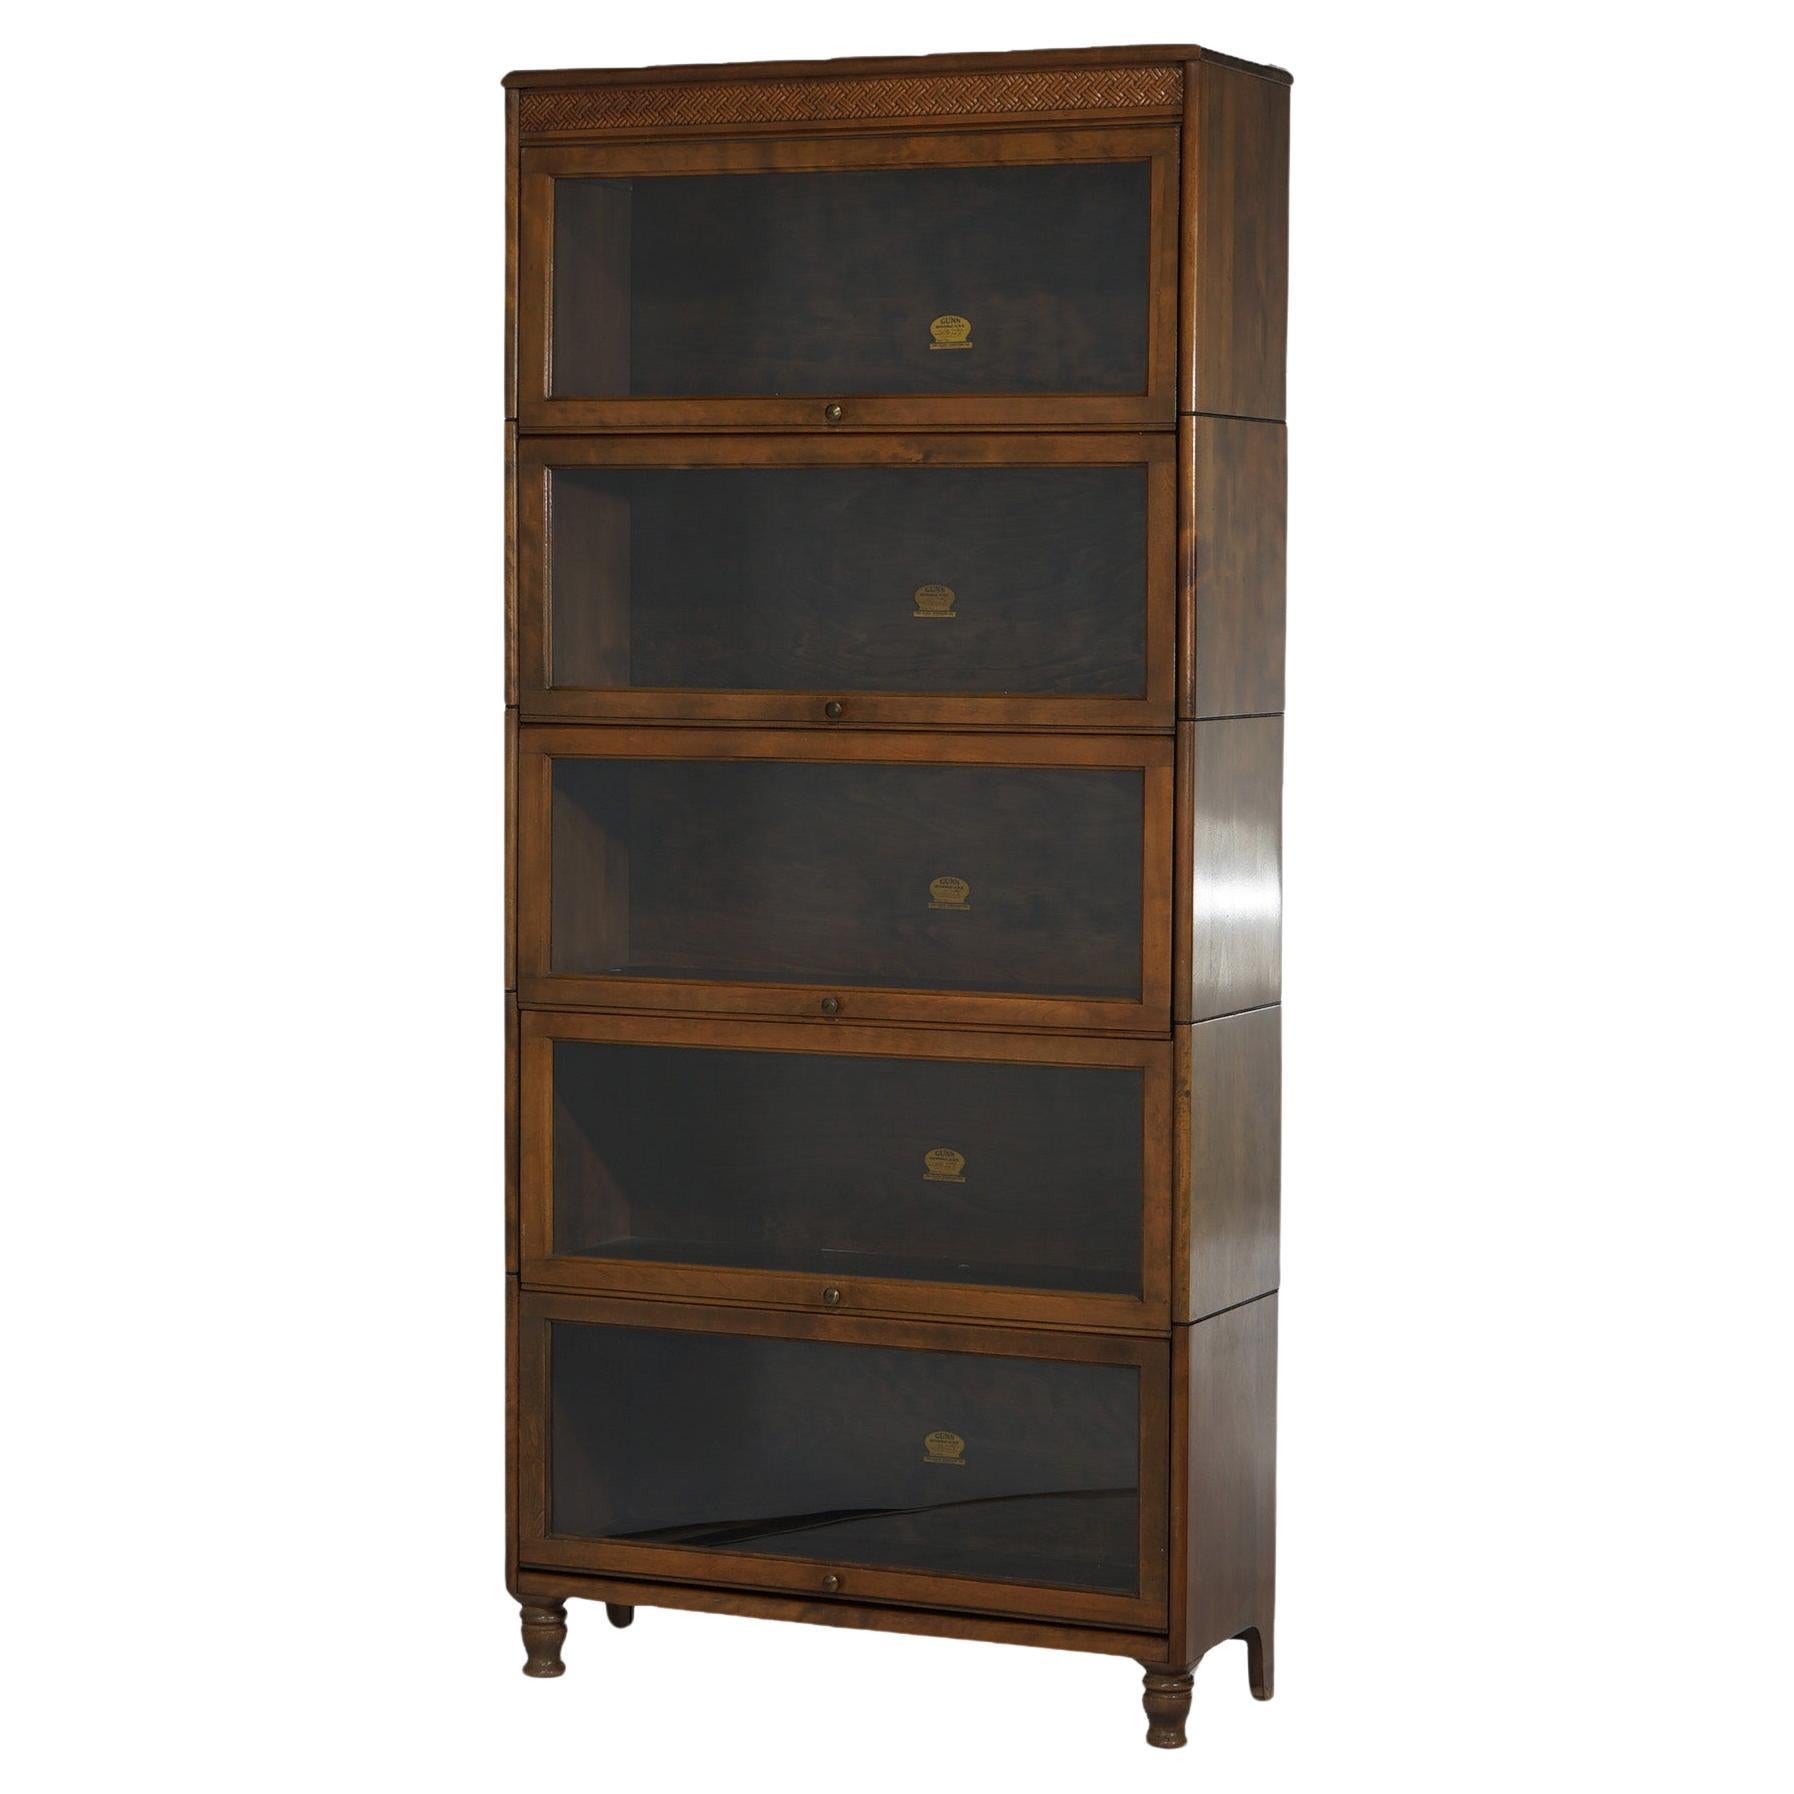 Antique Arts & Crafts Gunn Five Stack Cherry Barrister Bookcase Circa 1910 For Sale